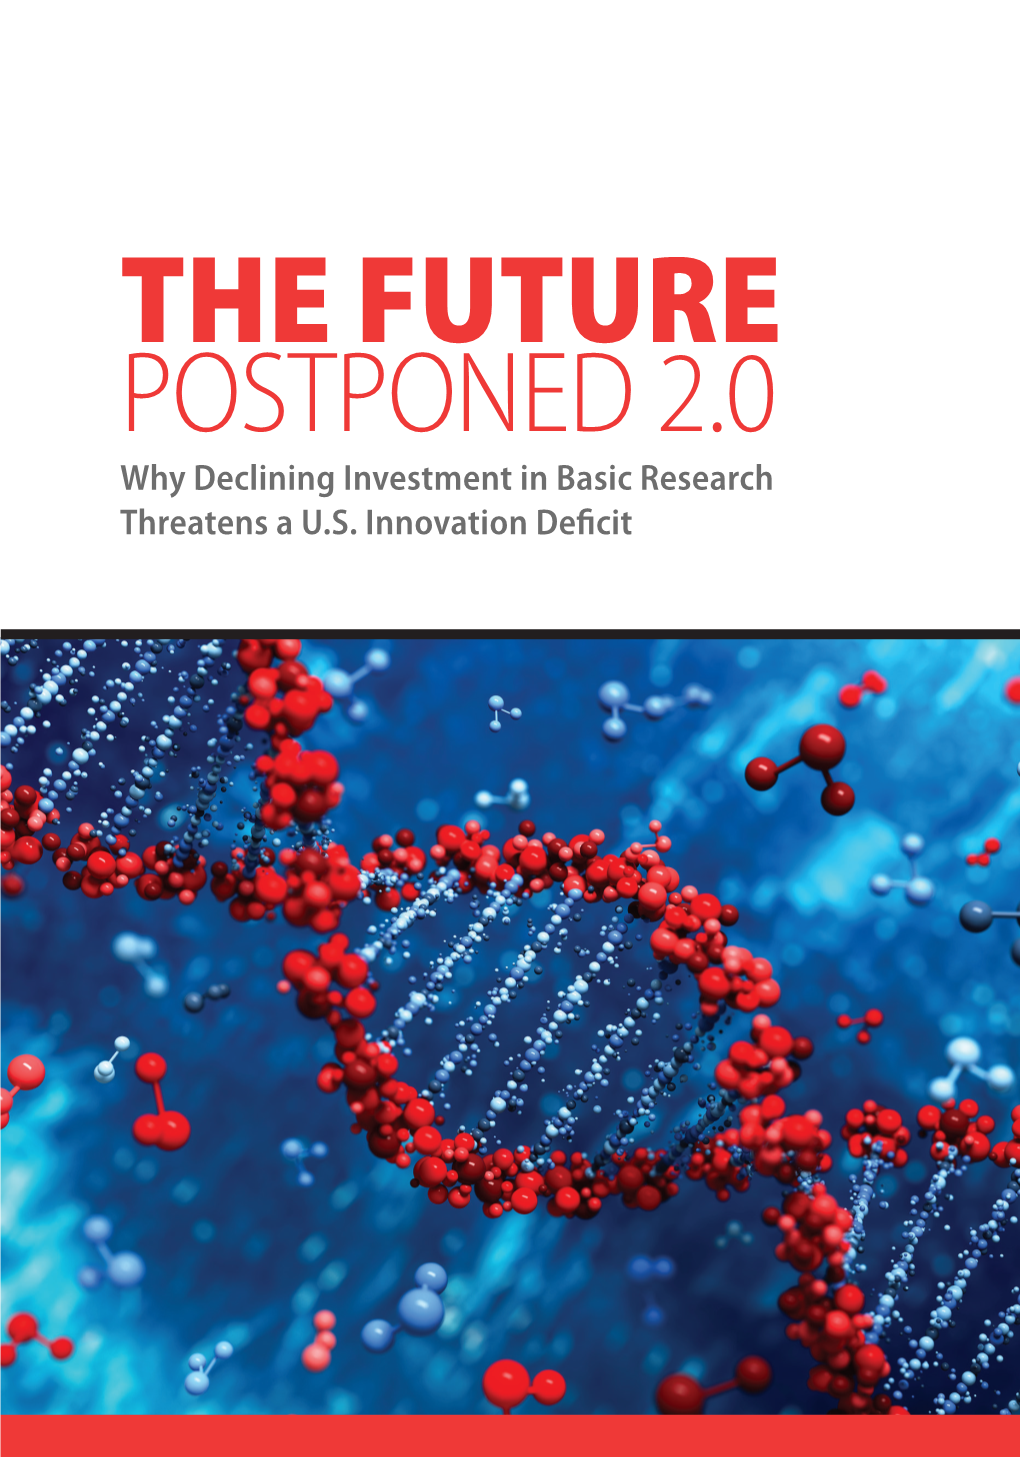 THE FUTURE POSTPONED 2.0 Why Declining Investment in Basic Research Threatens a U.S